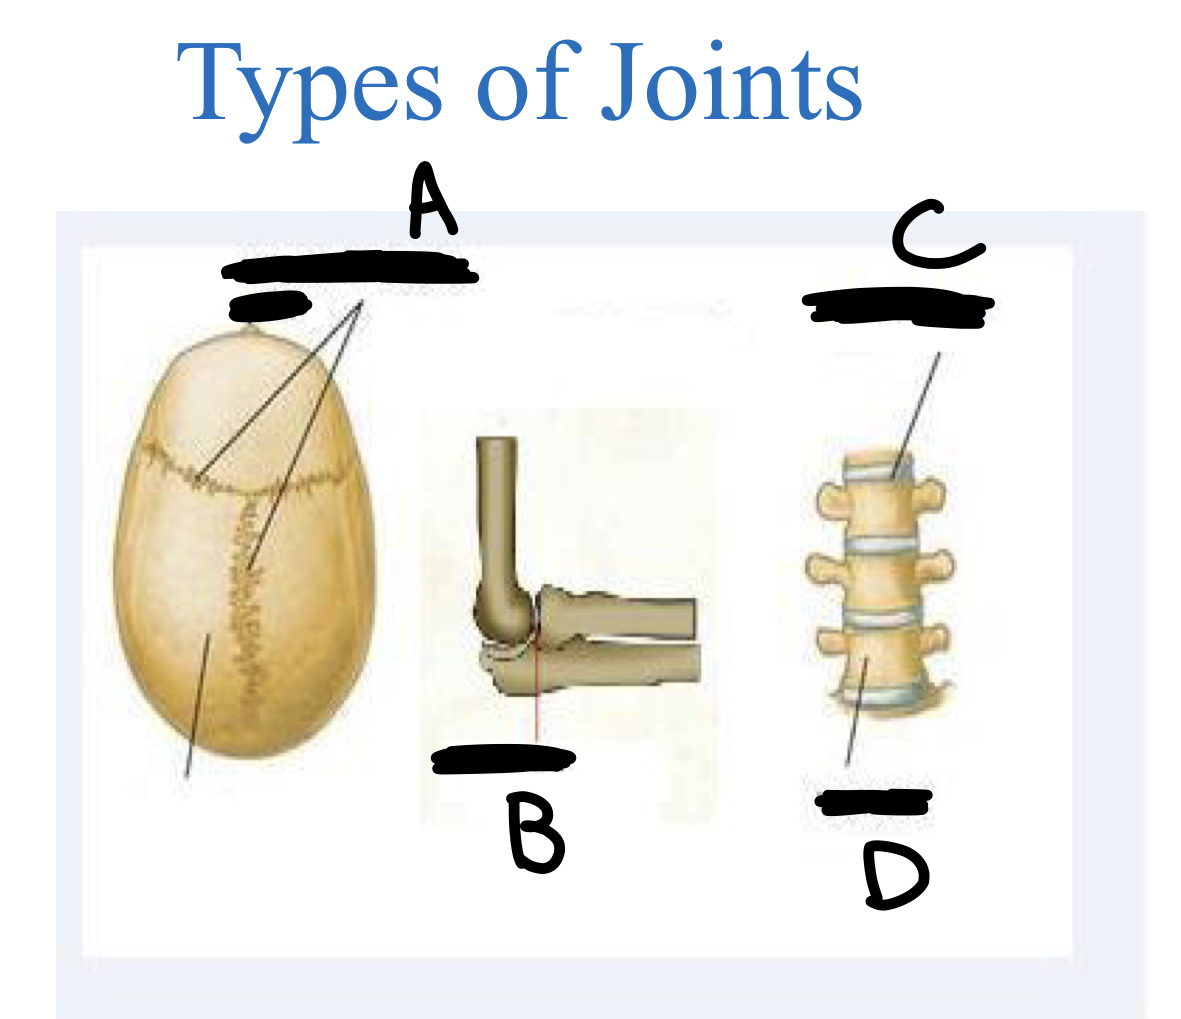 <p>A. fixed/unmoveable joint</p><p>B. flexible joint</p><p>C. semi flexible joint</p><p>D. vertebrae</p>